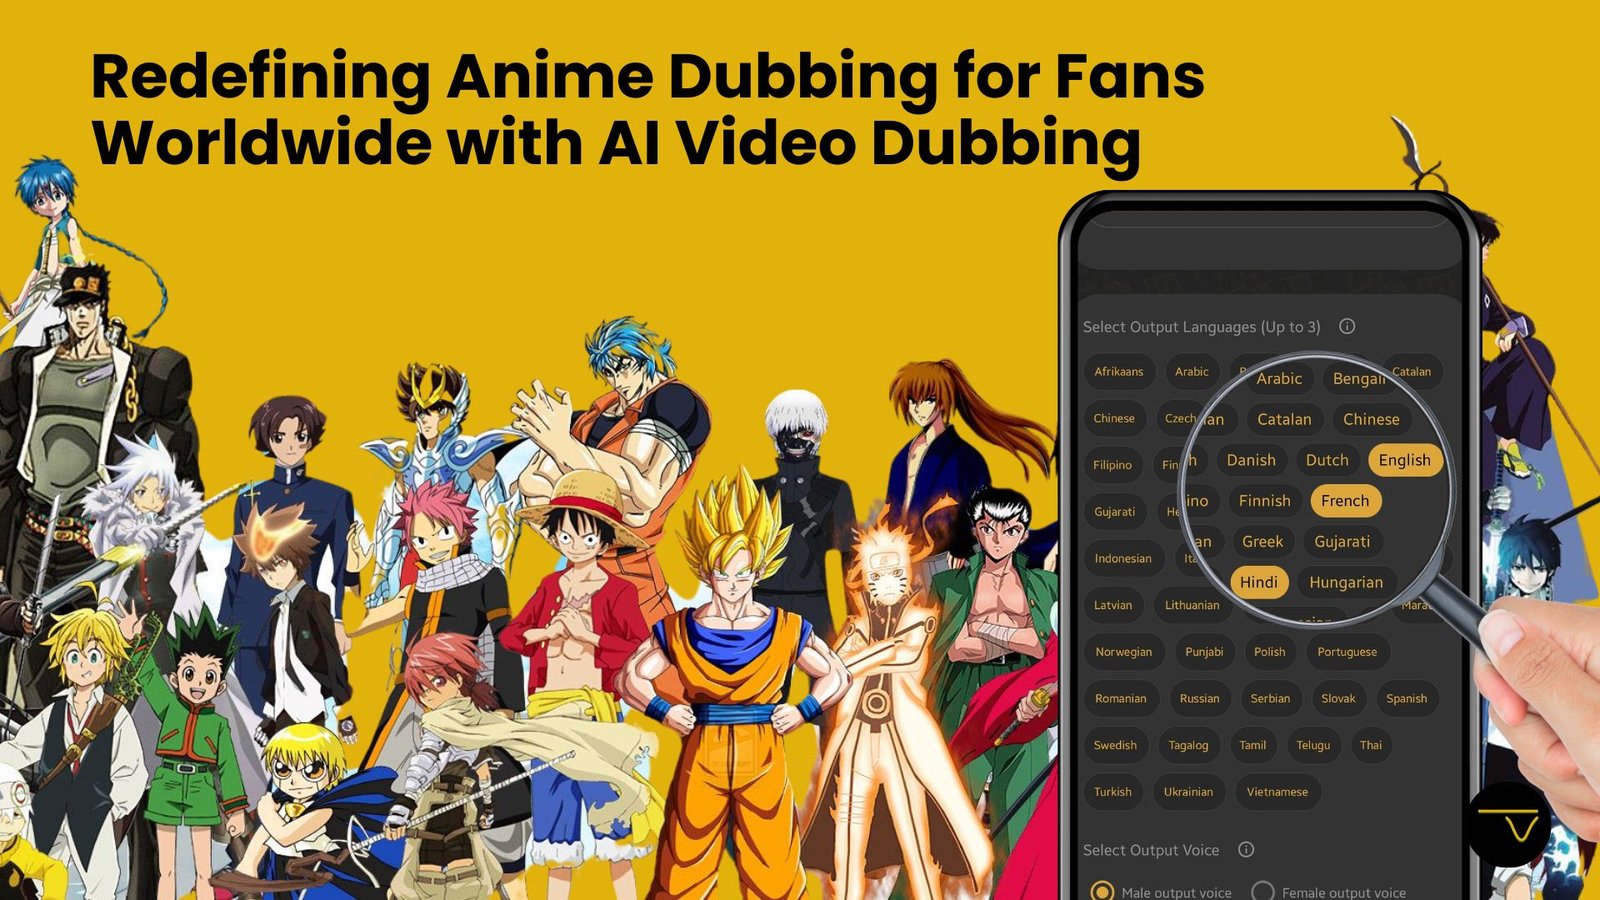 Redefining Anime Dubbing for Fans Worldwide with AI Video Dubbing